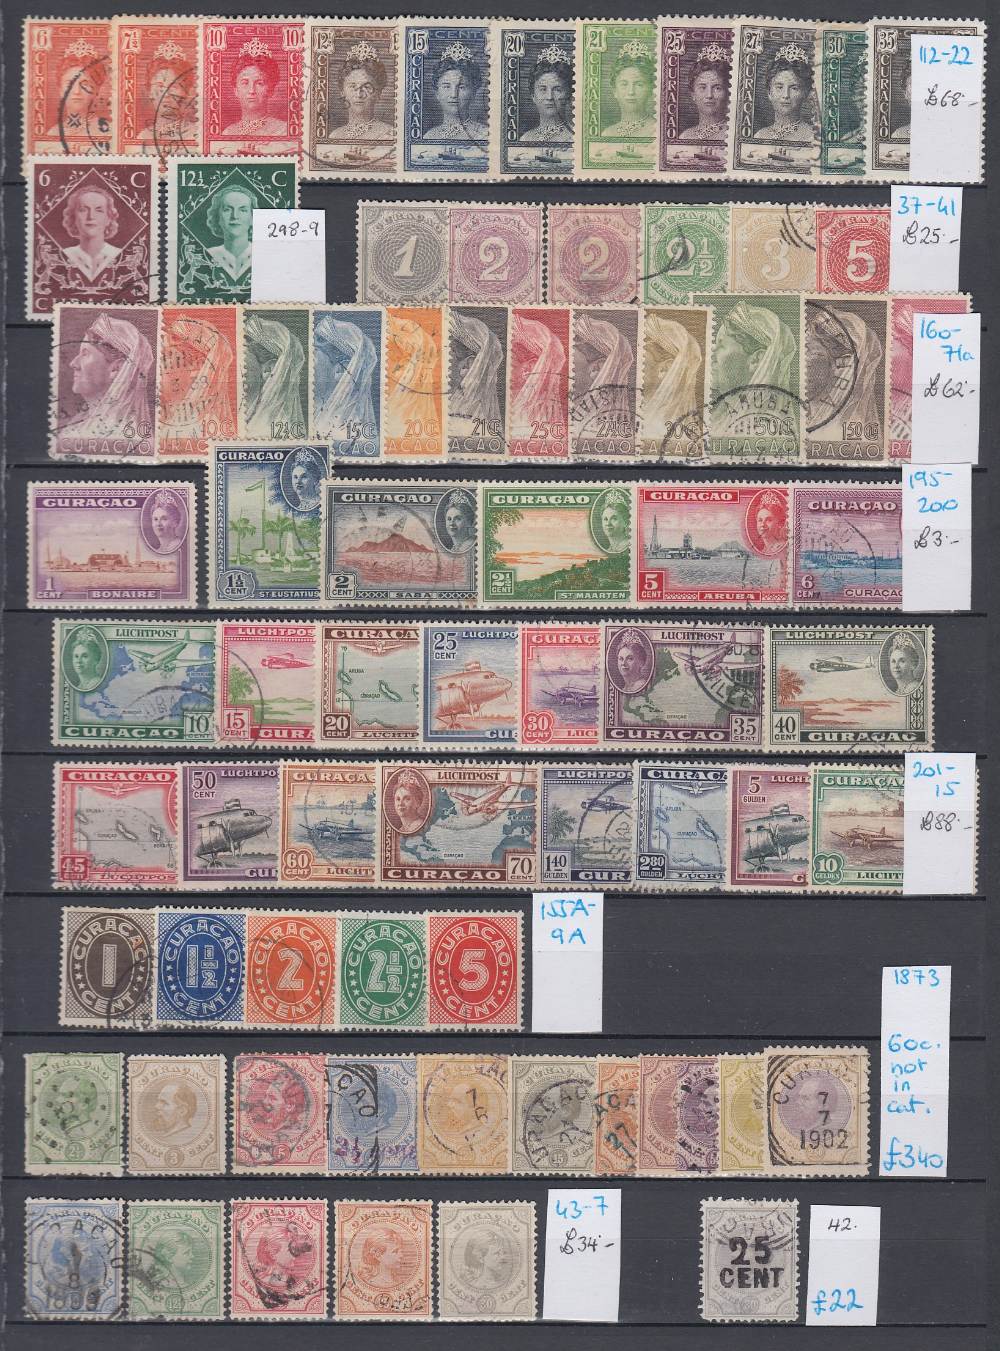 NETHERLANDS COLONIES STAMPS Mostly used accumulation on three stock pages, - Image 4 of 4